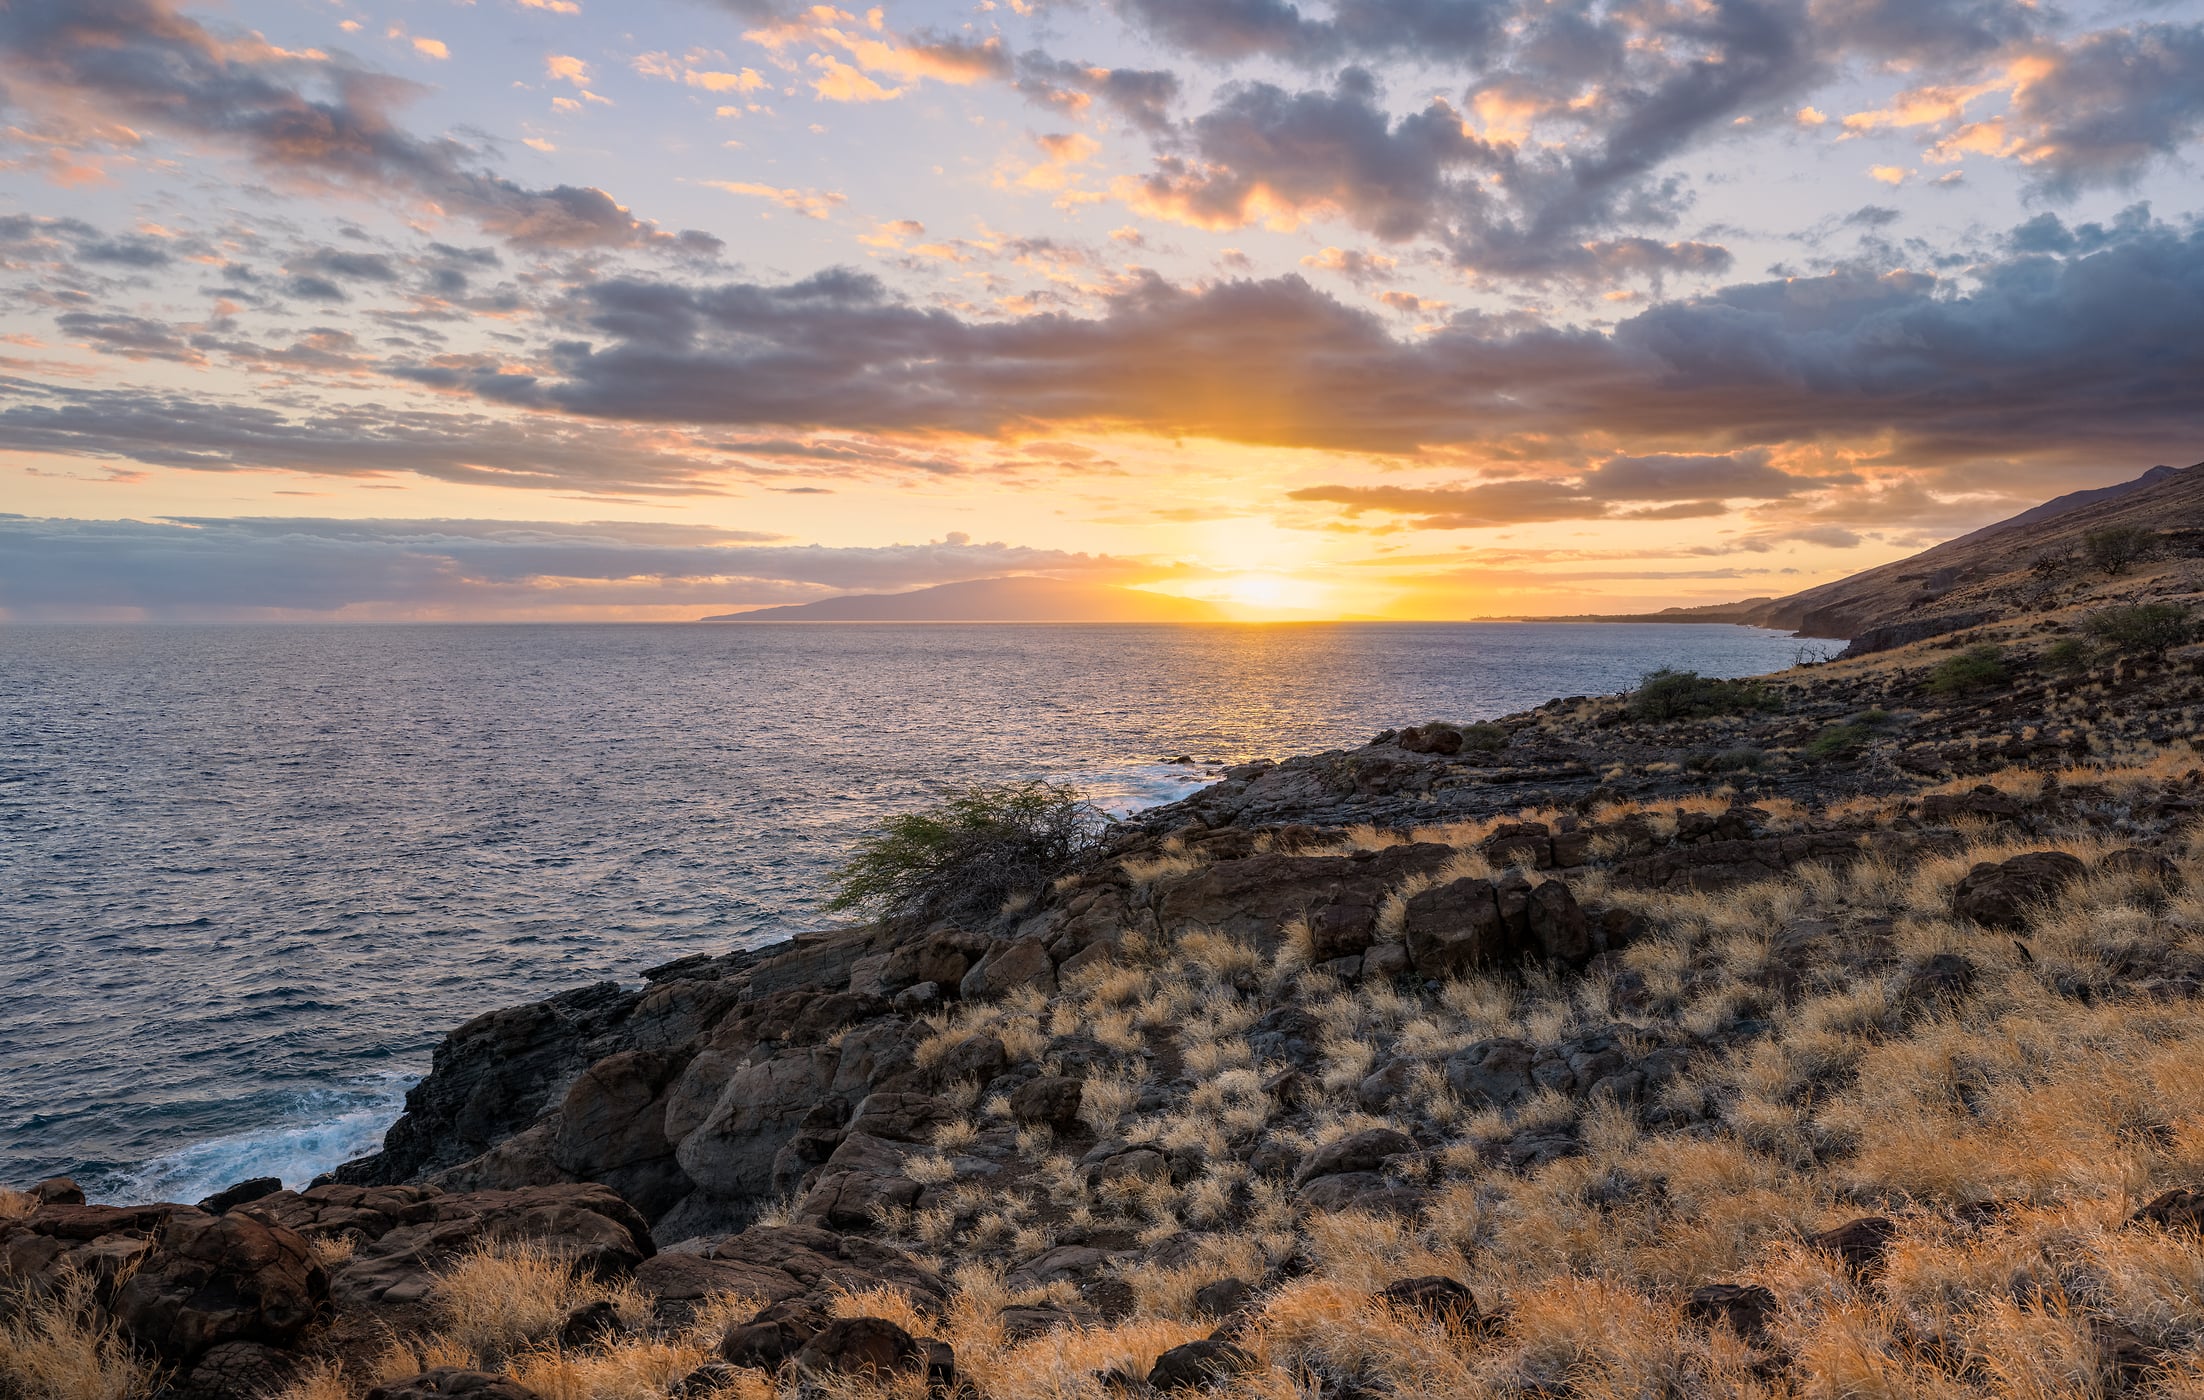 616 megapixels! A very high resolution, large-format VAST photo print of the scenic Papawai Lookout in Hawaii with the Pacific Ocean and sunset; landscape photograph created by Chris Blake in Maui, Hawaii.